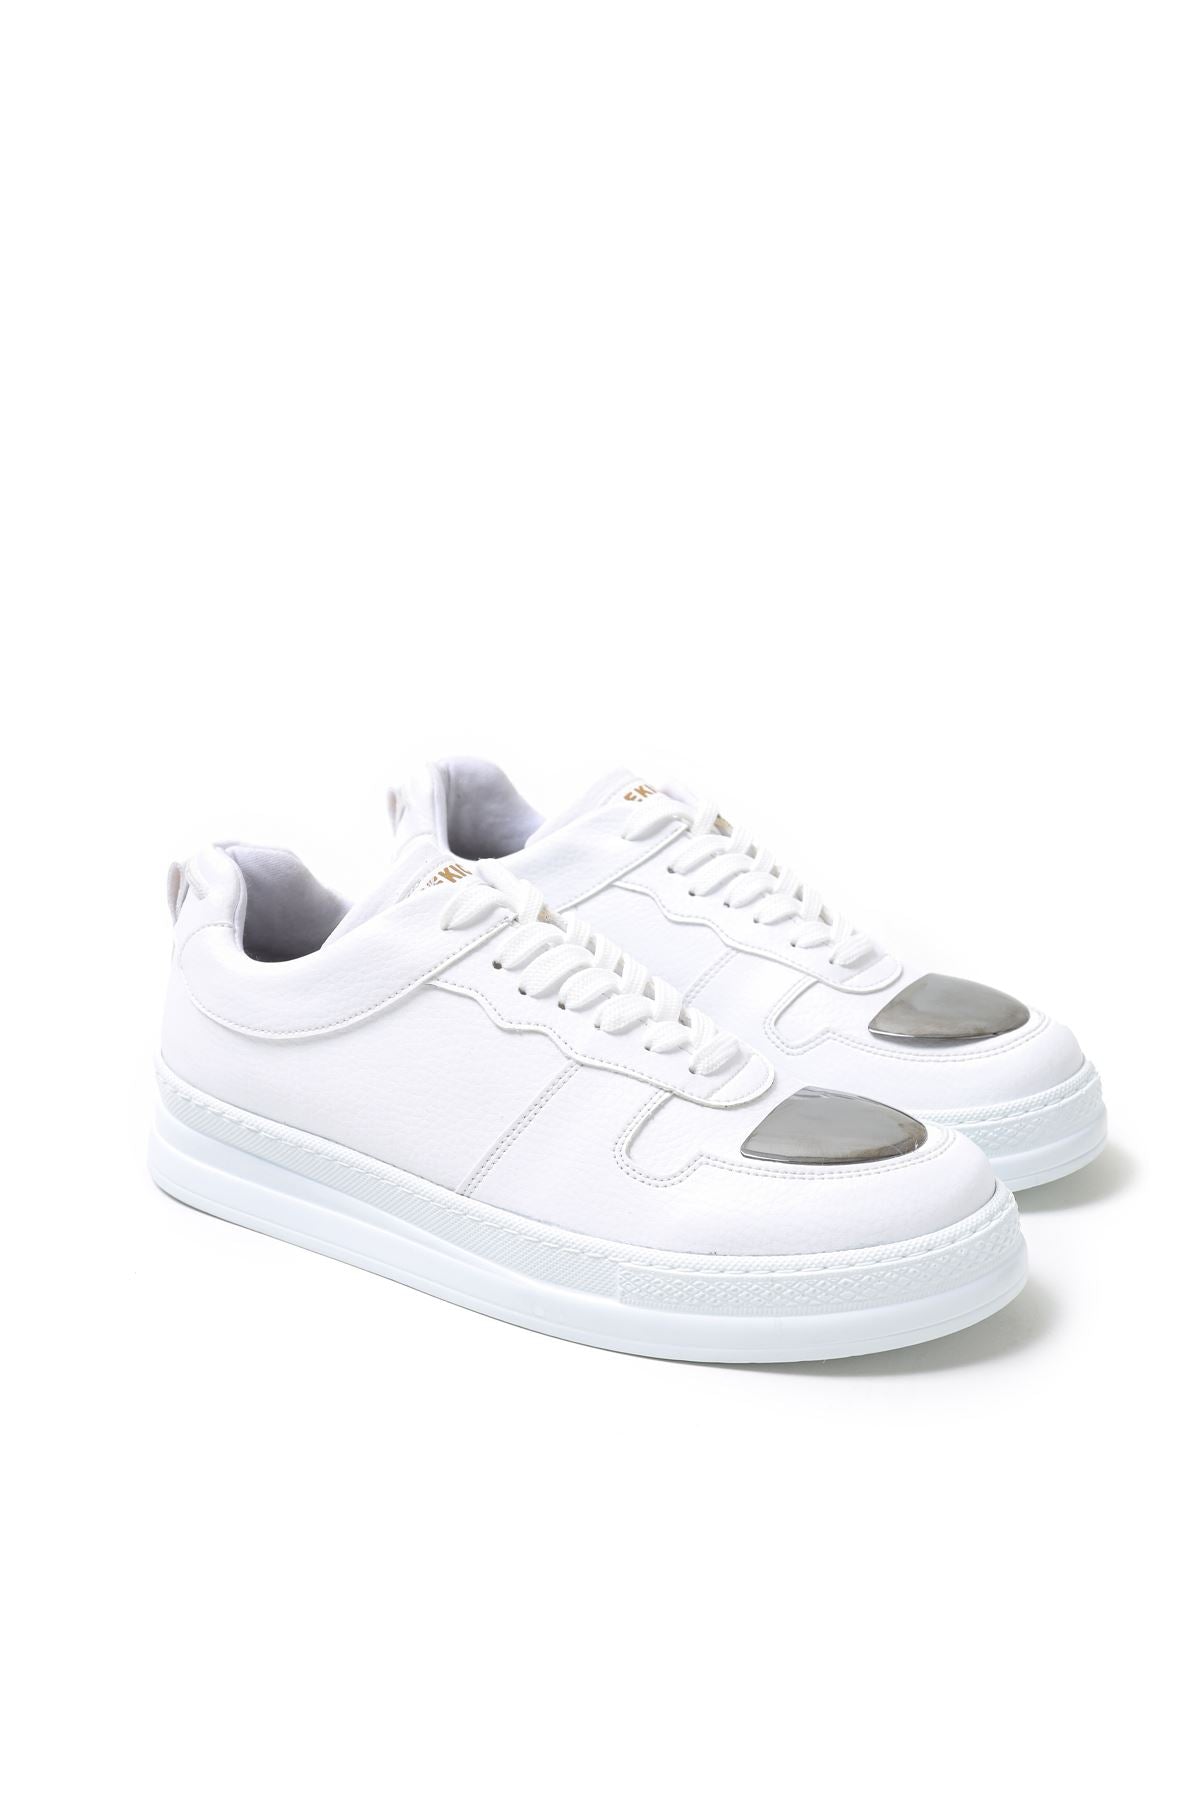 CH185 BT Men's Shoes WHITE - STREETMODE ™